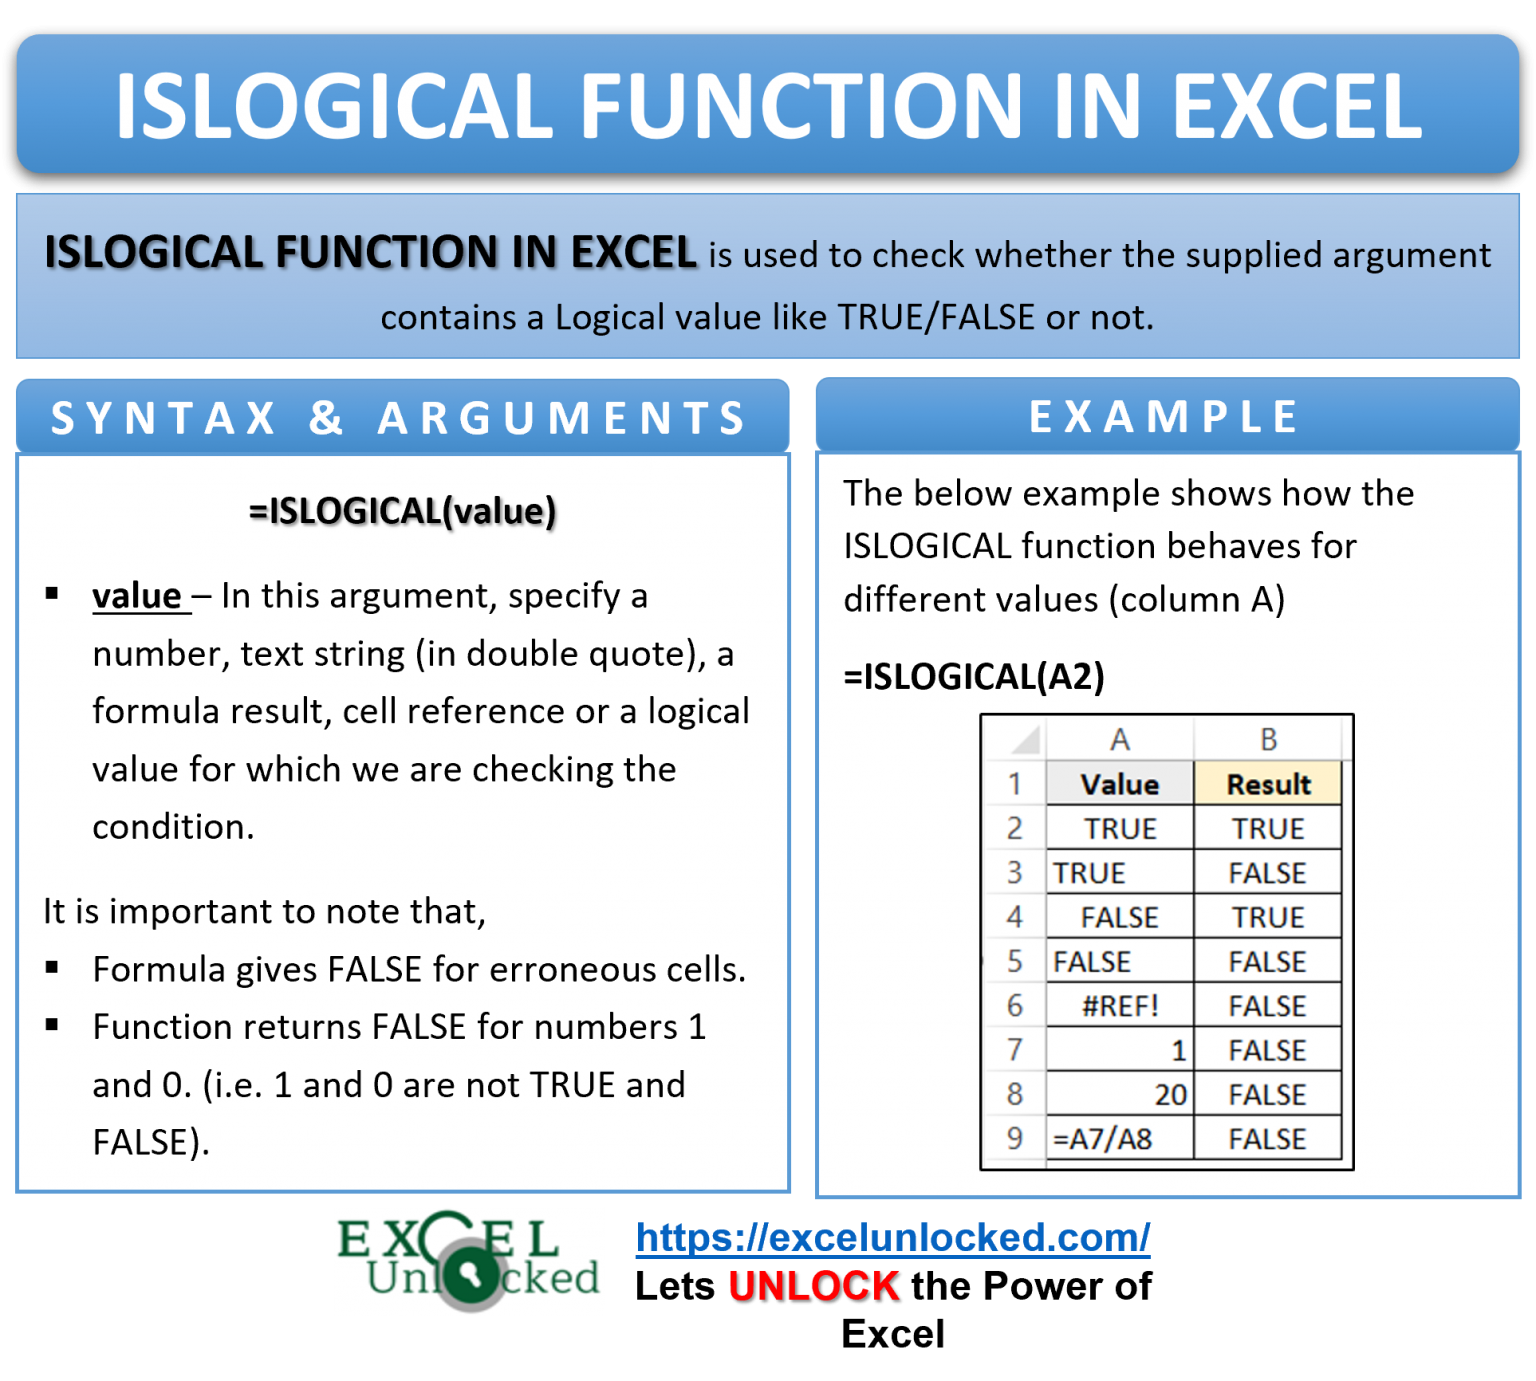 islogical-function-in-excel-checking-logical-value-excel-unlocked